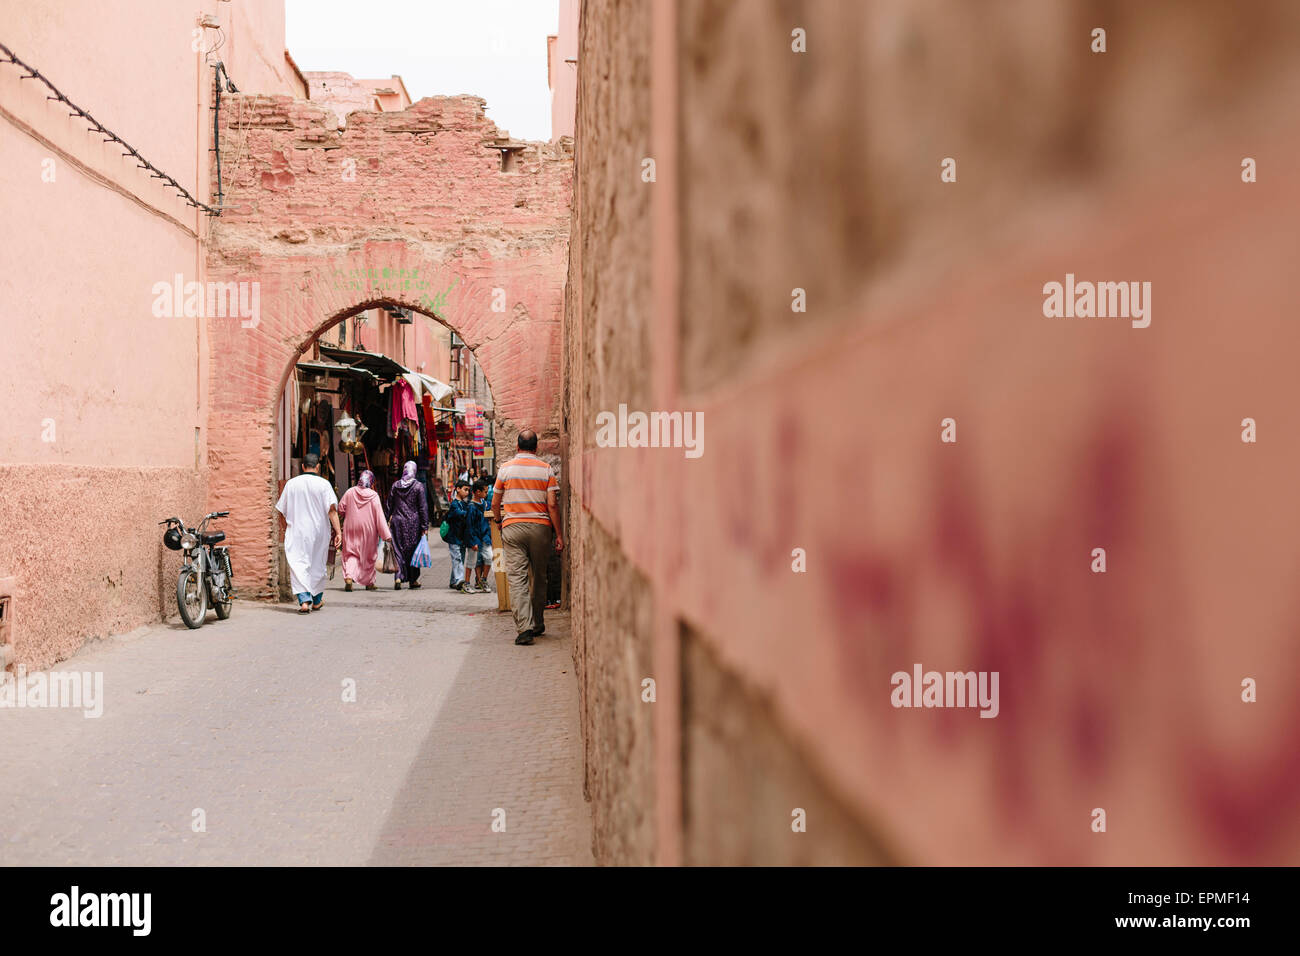 Locals walking through one of the medina gates in the Marrakech old town in Morocco. Stock Photo